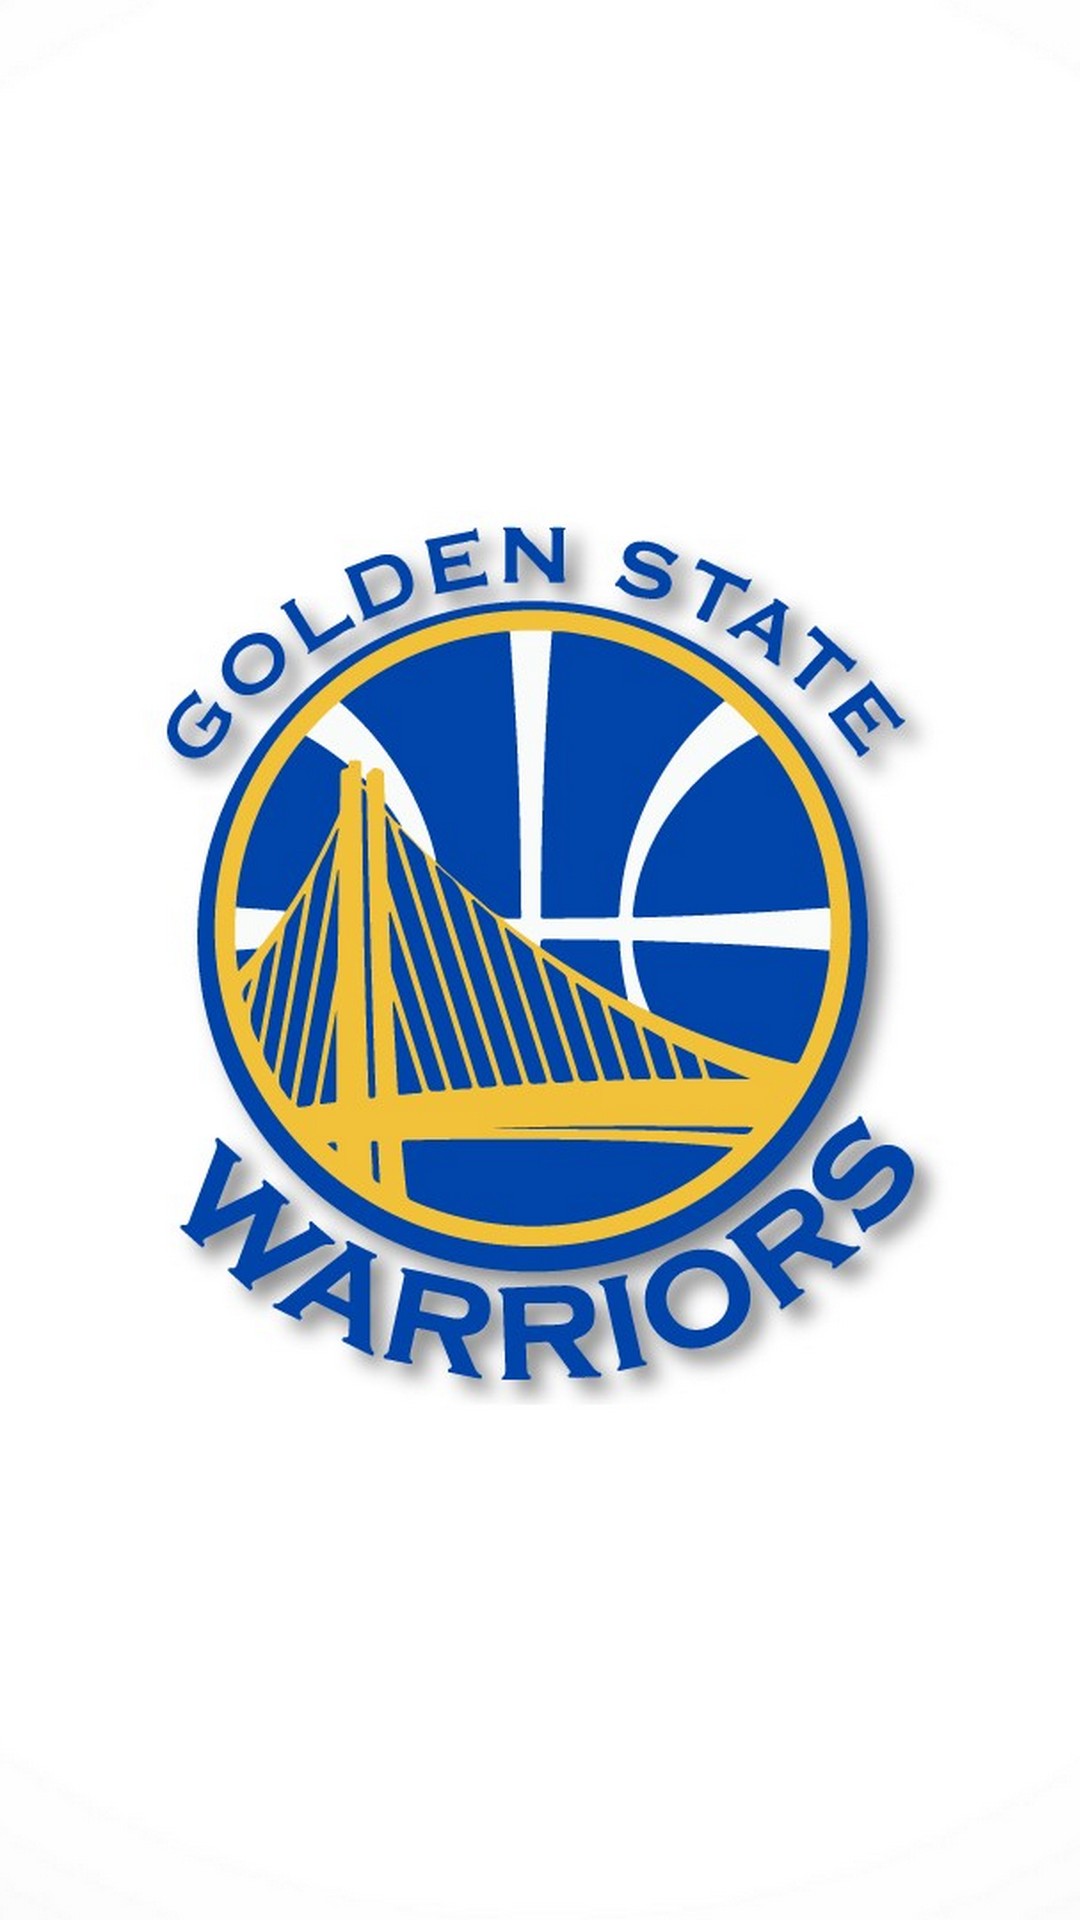 Golden State Warriors HD Wallpaper For iPhone with resolution 1080X1920 pixel. You can use this wallpaper as background for your desktop Computer Screensavers, Android or iPhone smartphones